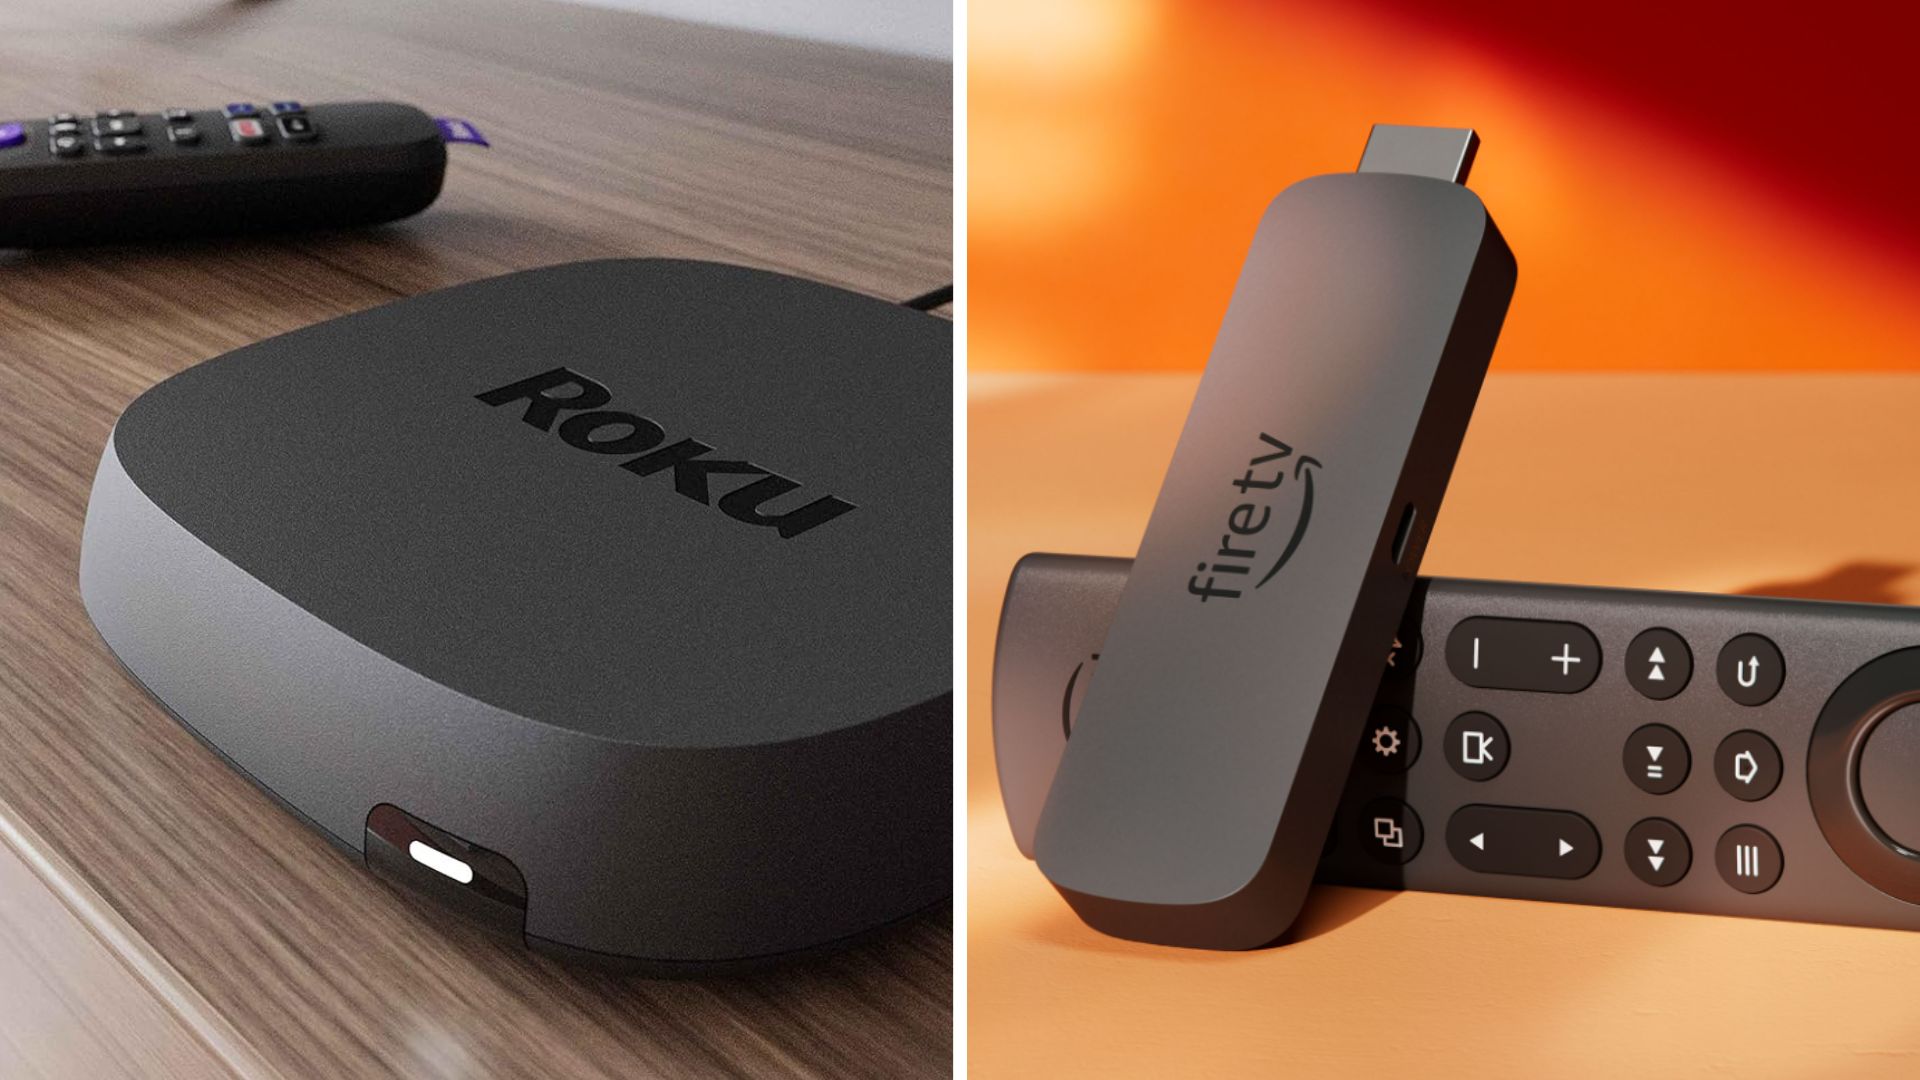 Fire TV Sticks, Streaming Devices, Smart TVs & More